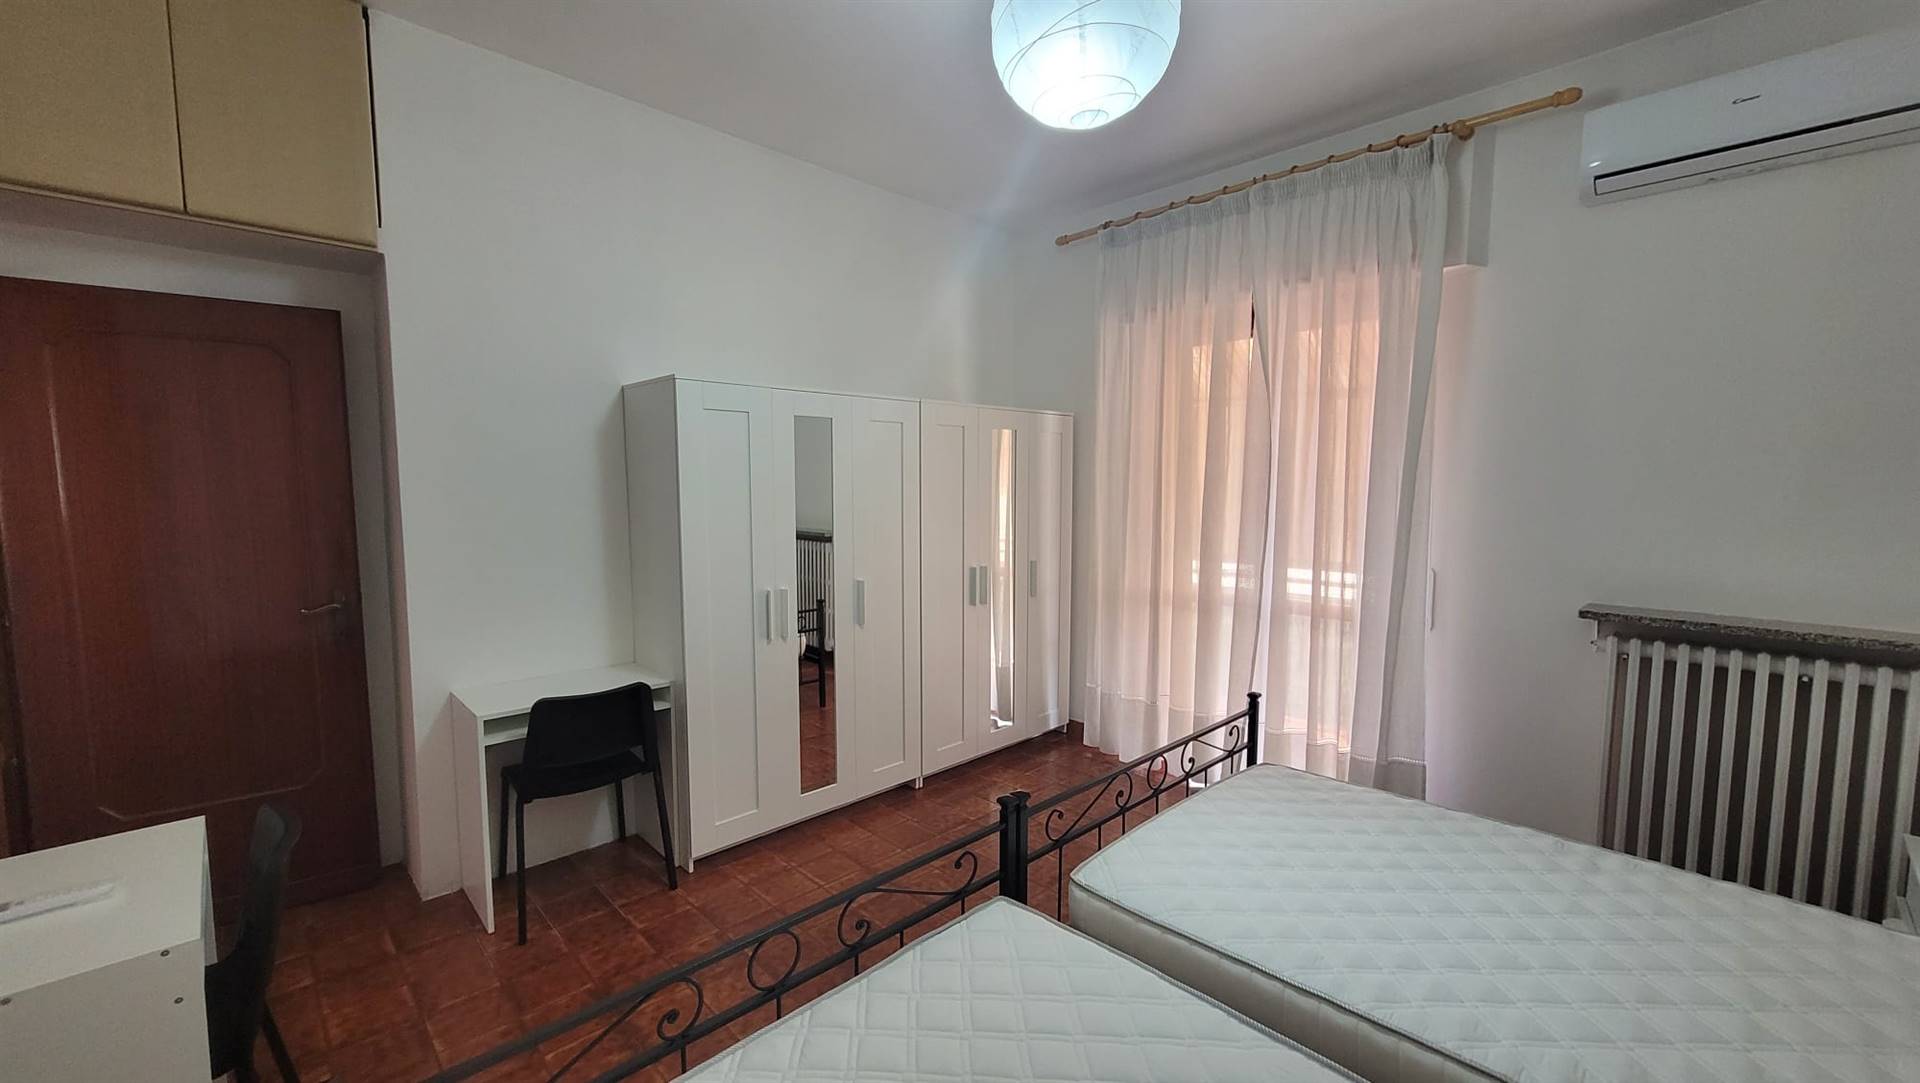 LABARO, ROMA, Room/Bedroom for rent of 30 Sq. mt., Excellent Condition, Heating Individual heating system, Energetic class: G, placed at 4°, composed by: 2 Rooms, Separate kitchen, 1 Bedroom, 2 